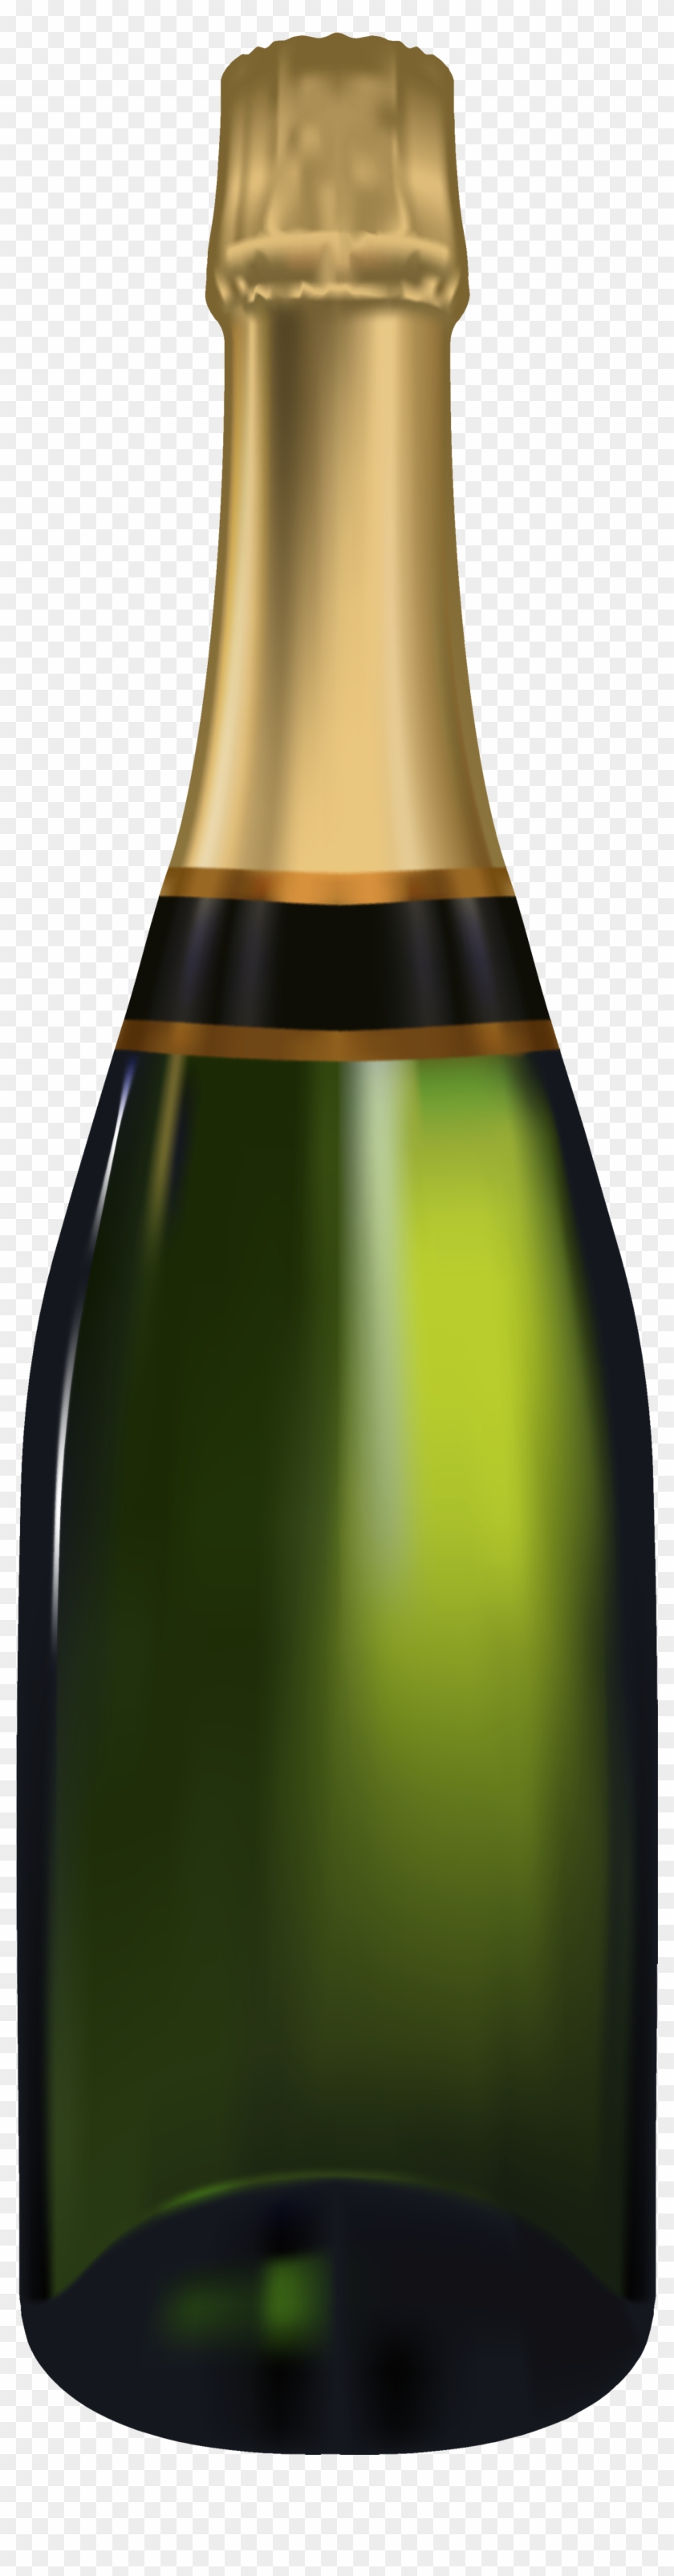 Wine Bottle With Transparent Clipart - Cartoon Champagne Bottle Png #391268